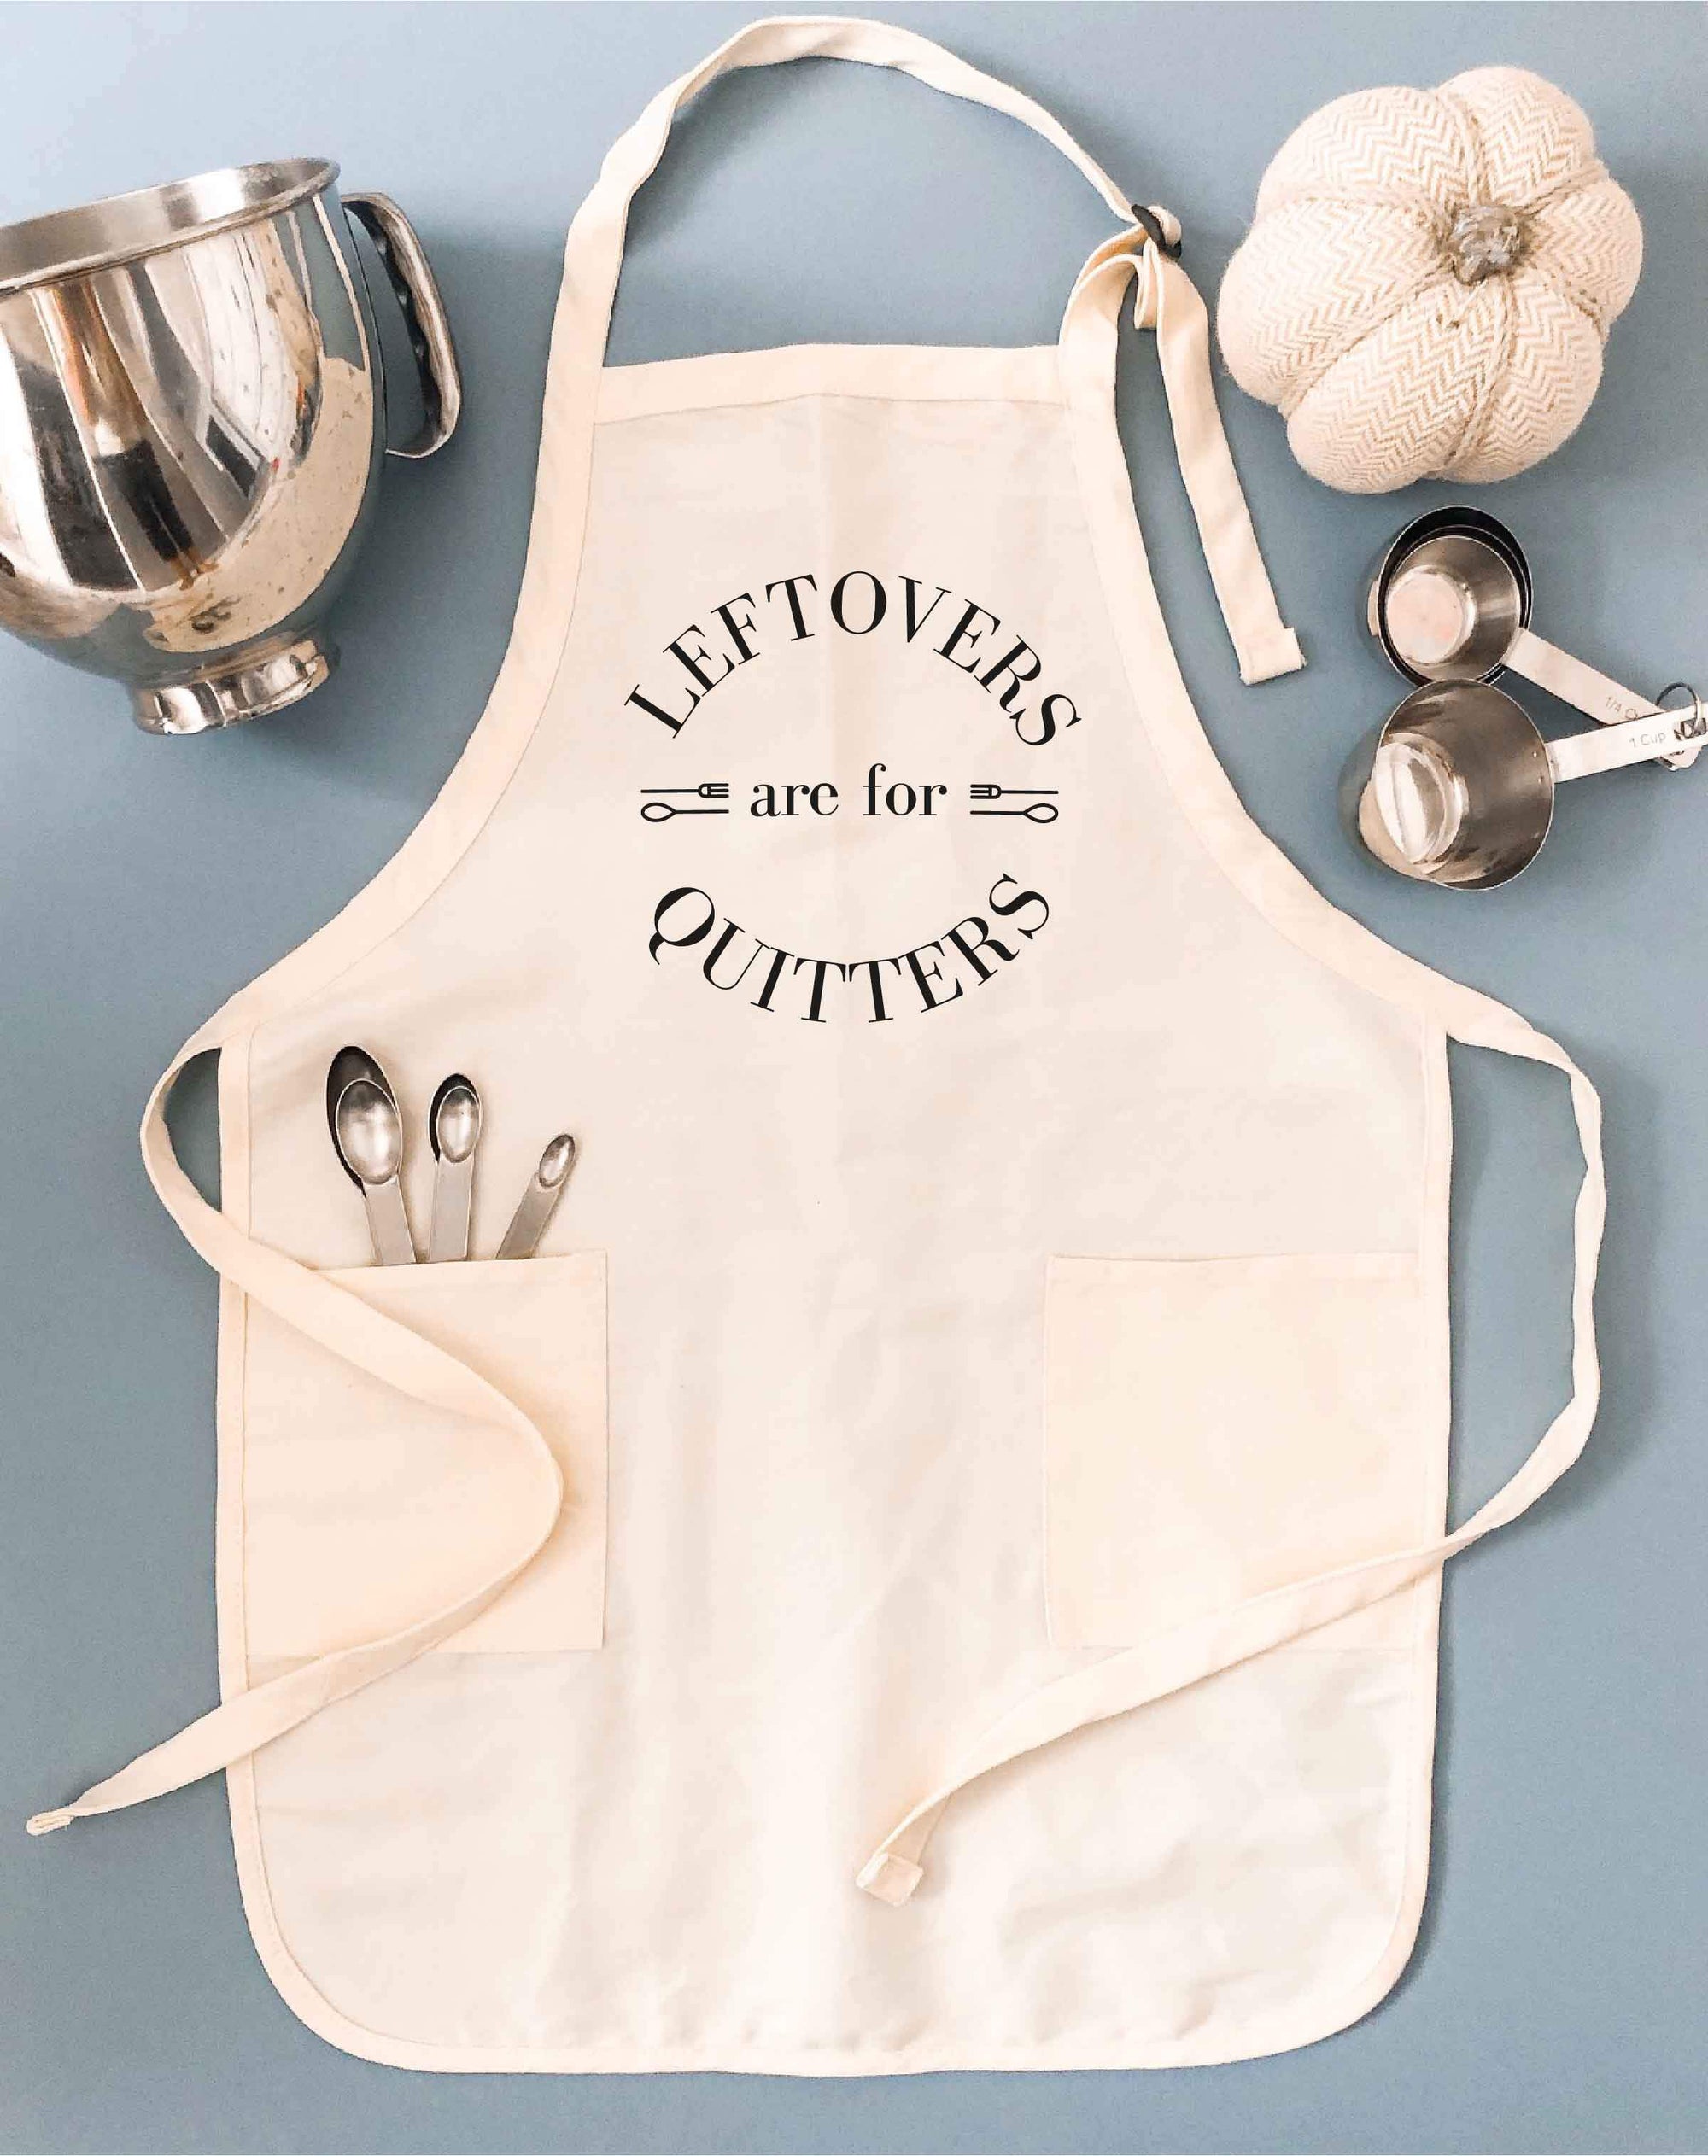 Leftovers are for quitters apron Fall apron Apron 